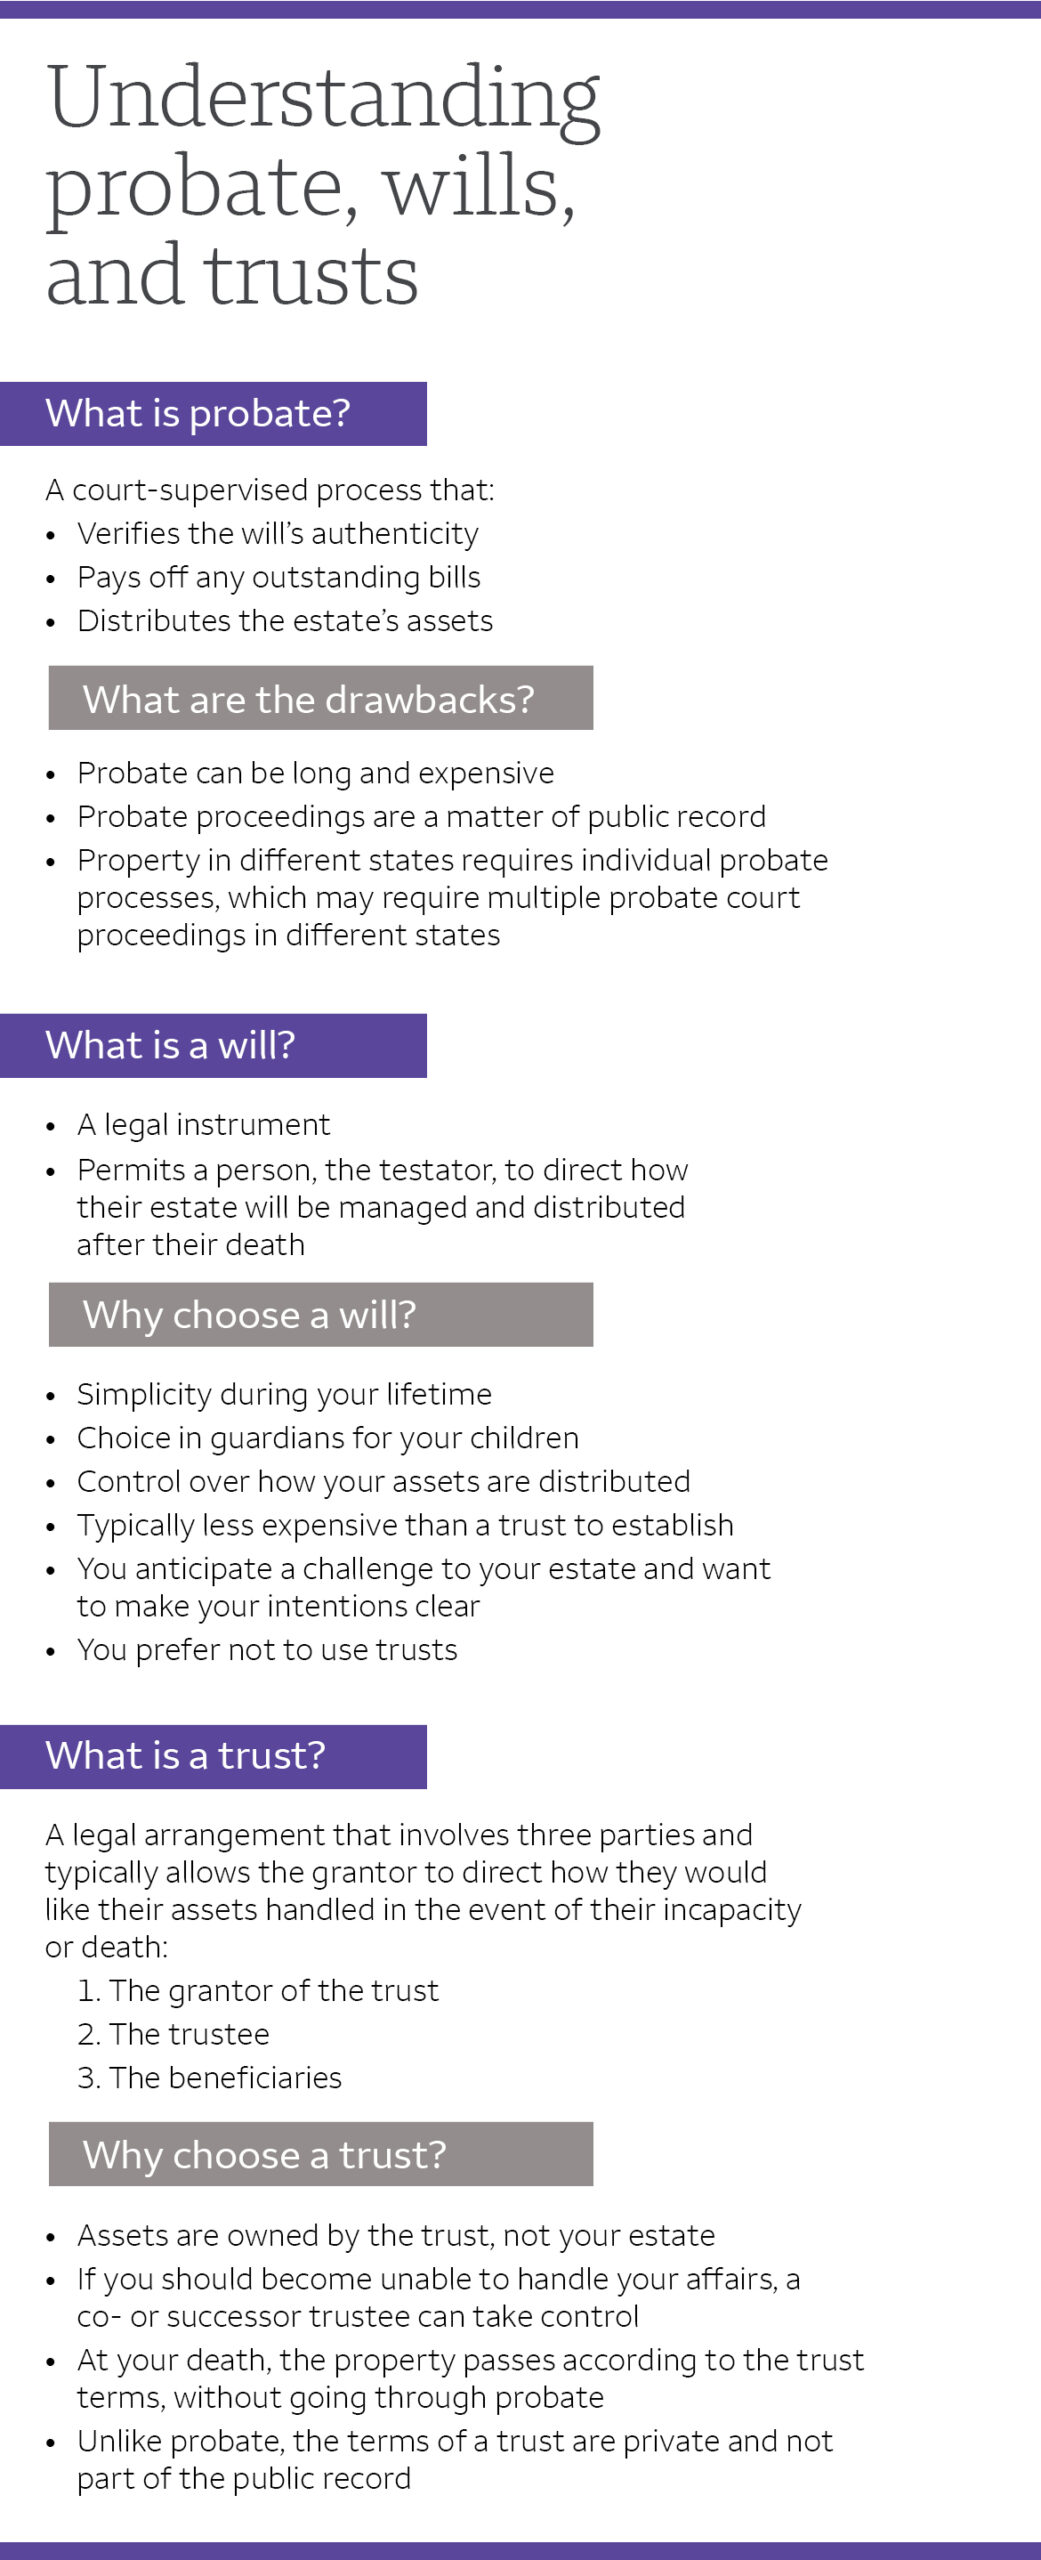 Infographic outlining the basics of probate, wills, and trusts. For details, click "view text alternative."